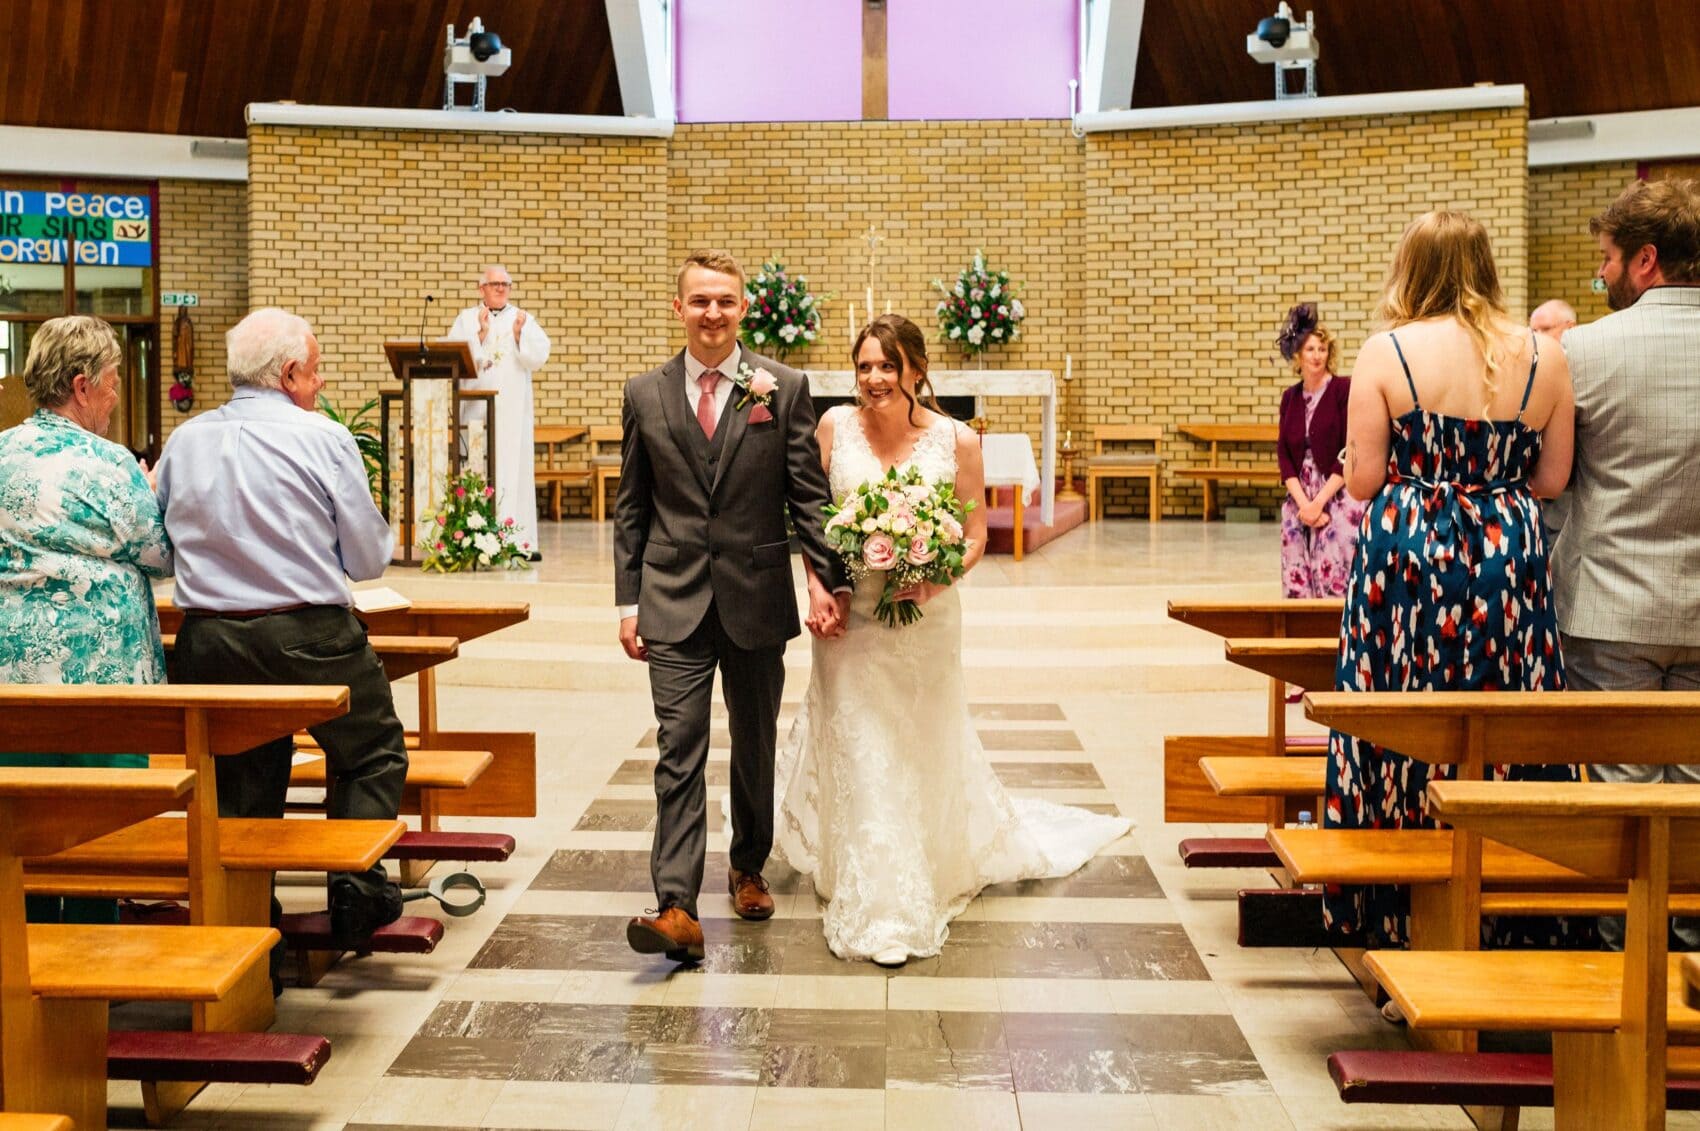 Megan and Ben exit the wedding ceremony at St Mary's Catholic Church